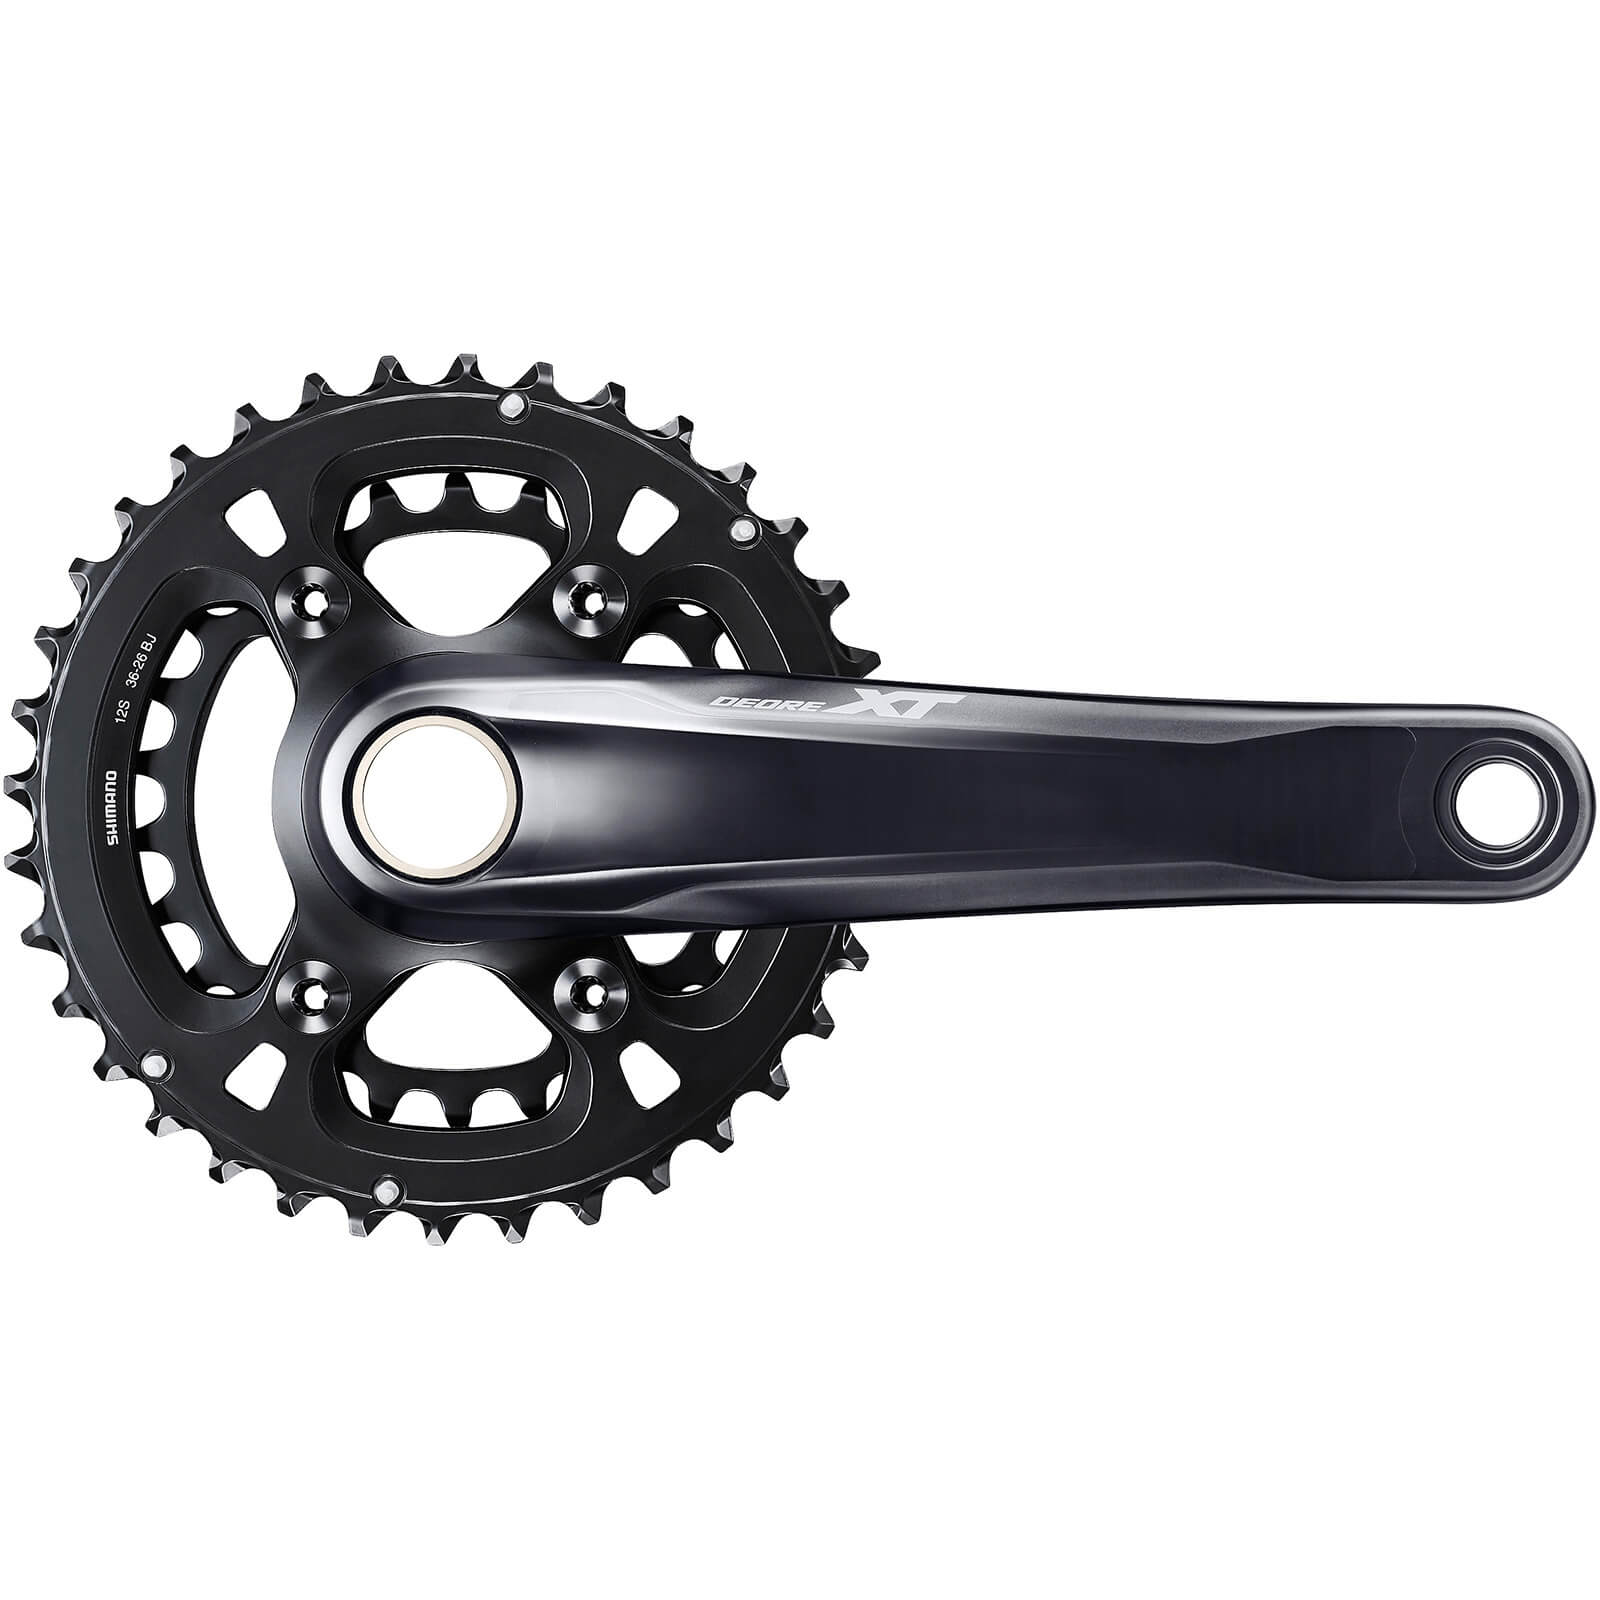 Shimano Deore XT M8120 Chainset - 36/26 - 165mm